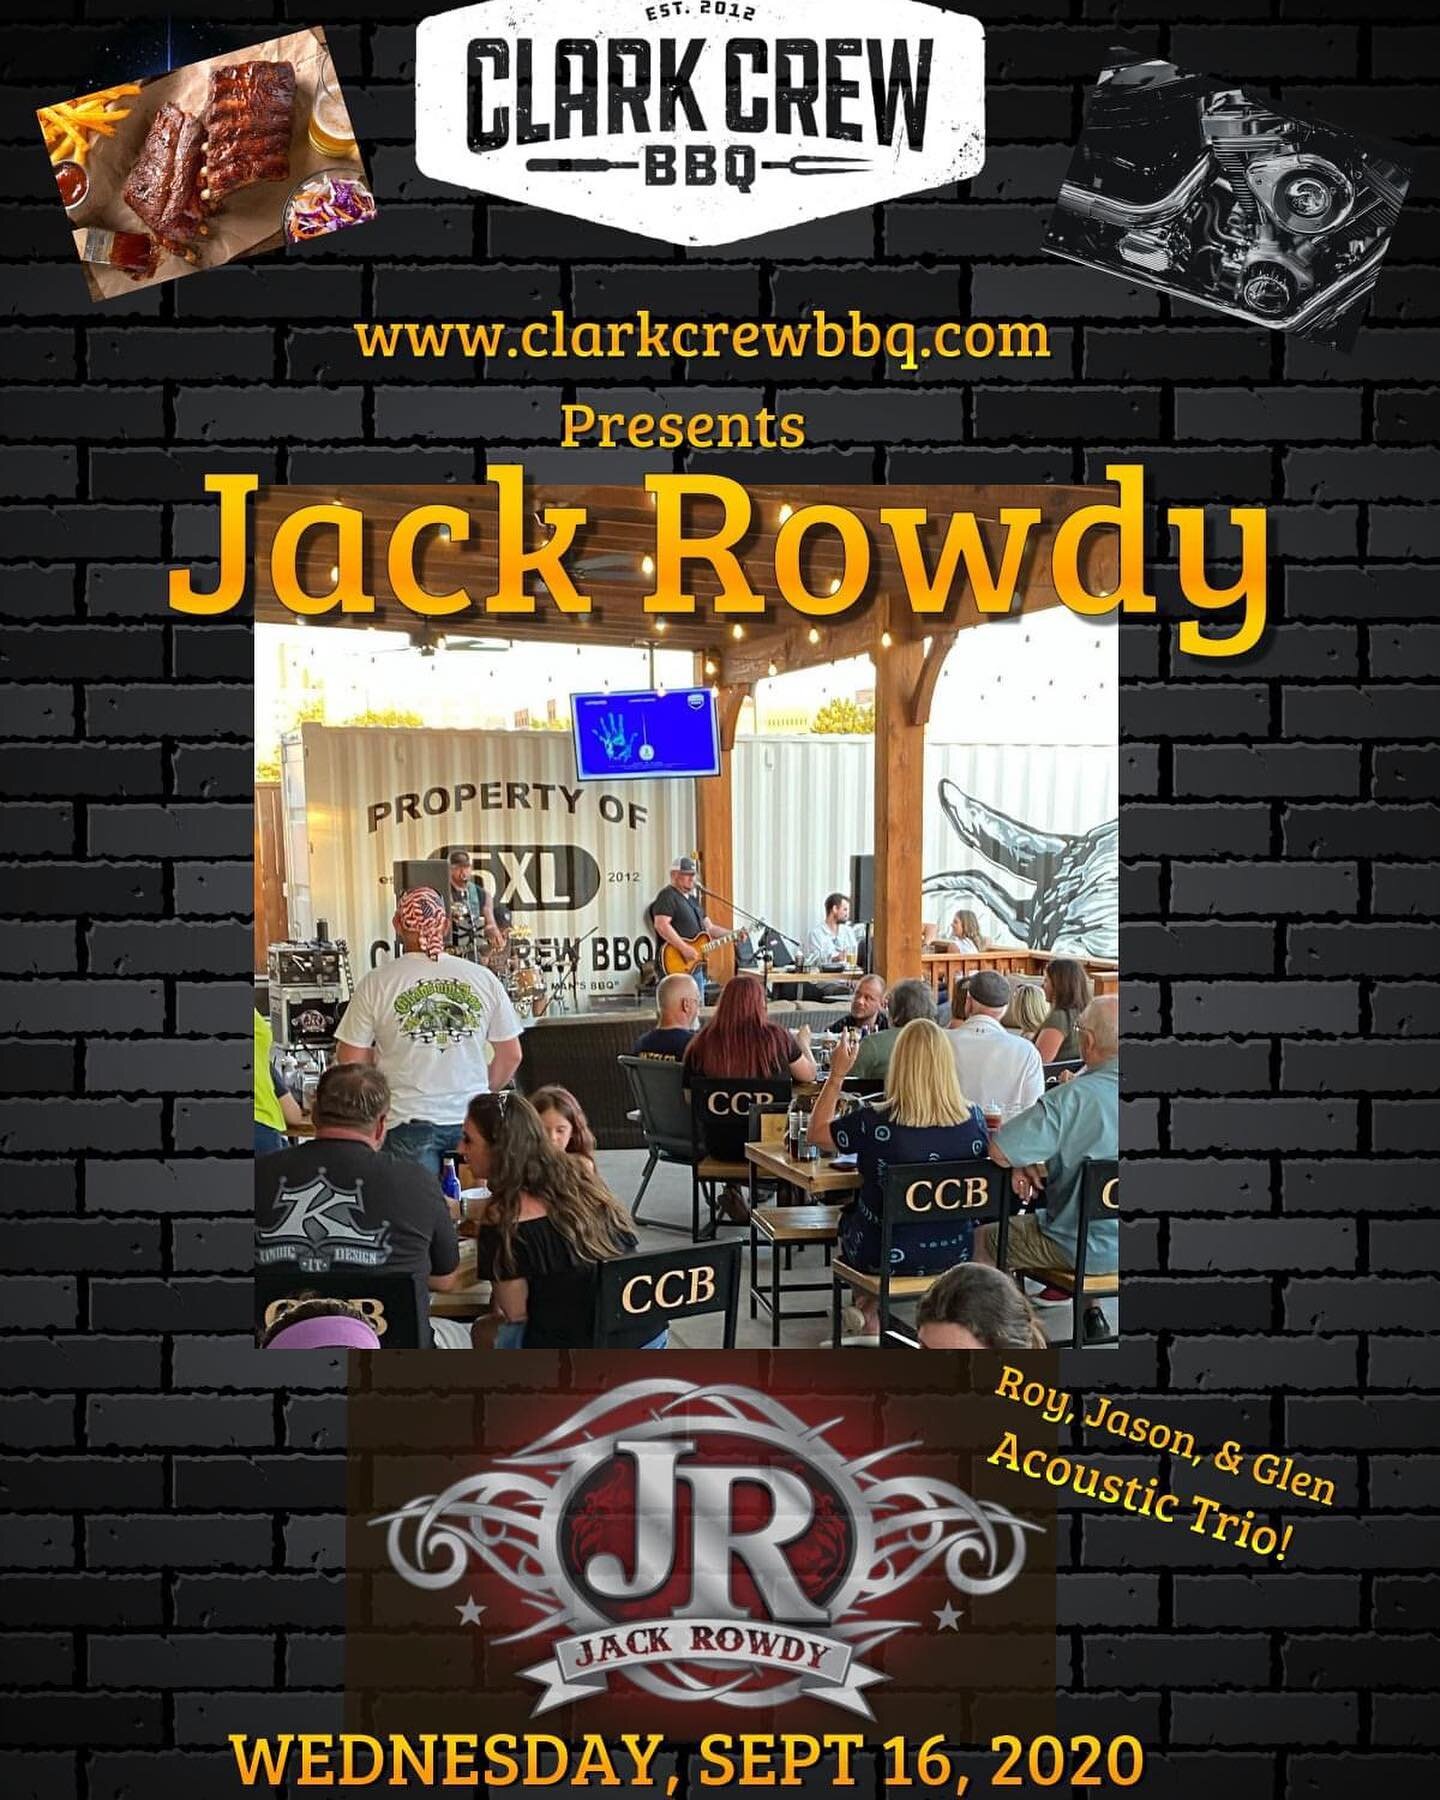 Jack Rowdy Band is back!!! This Wednesday night on the patio! We are gonna have some food and drink specials.....this is gonna be fun!
.
.
.
#bikenight #clarkcrewbbq #eatlocal #bbq #eatokc  #beef #local #foodie #livemusic #curbside #togo #barbecue #m